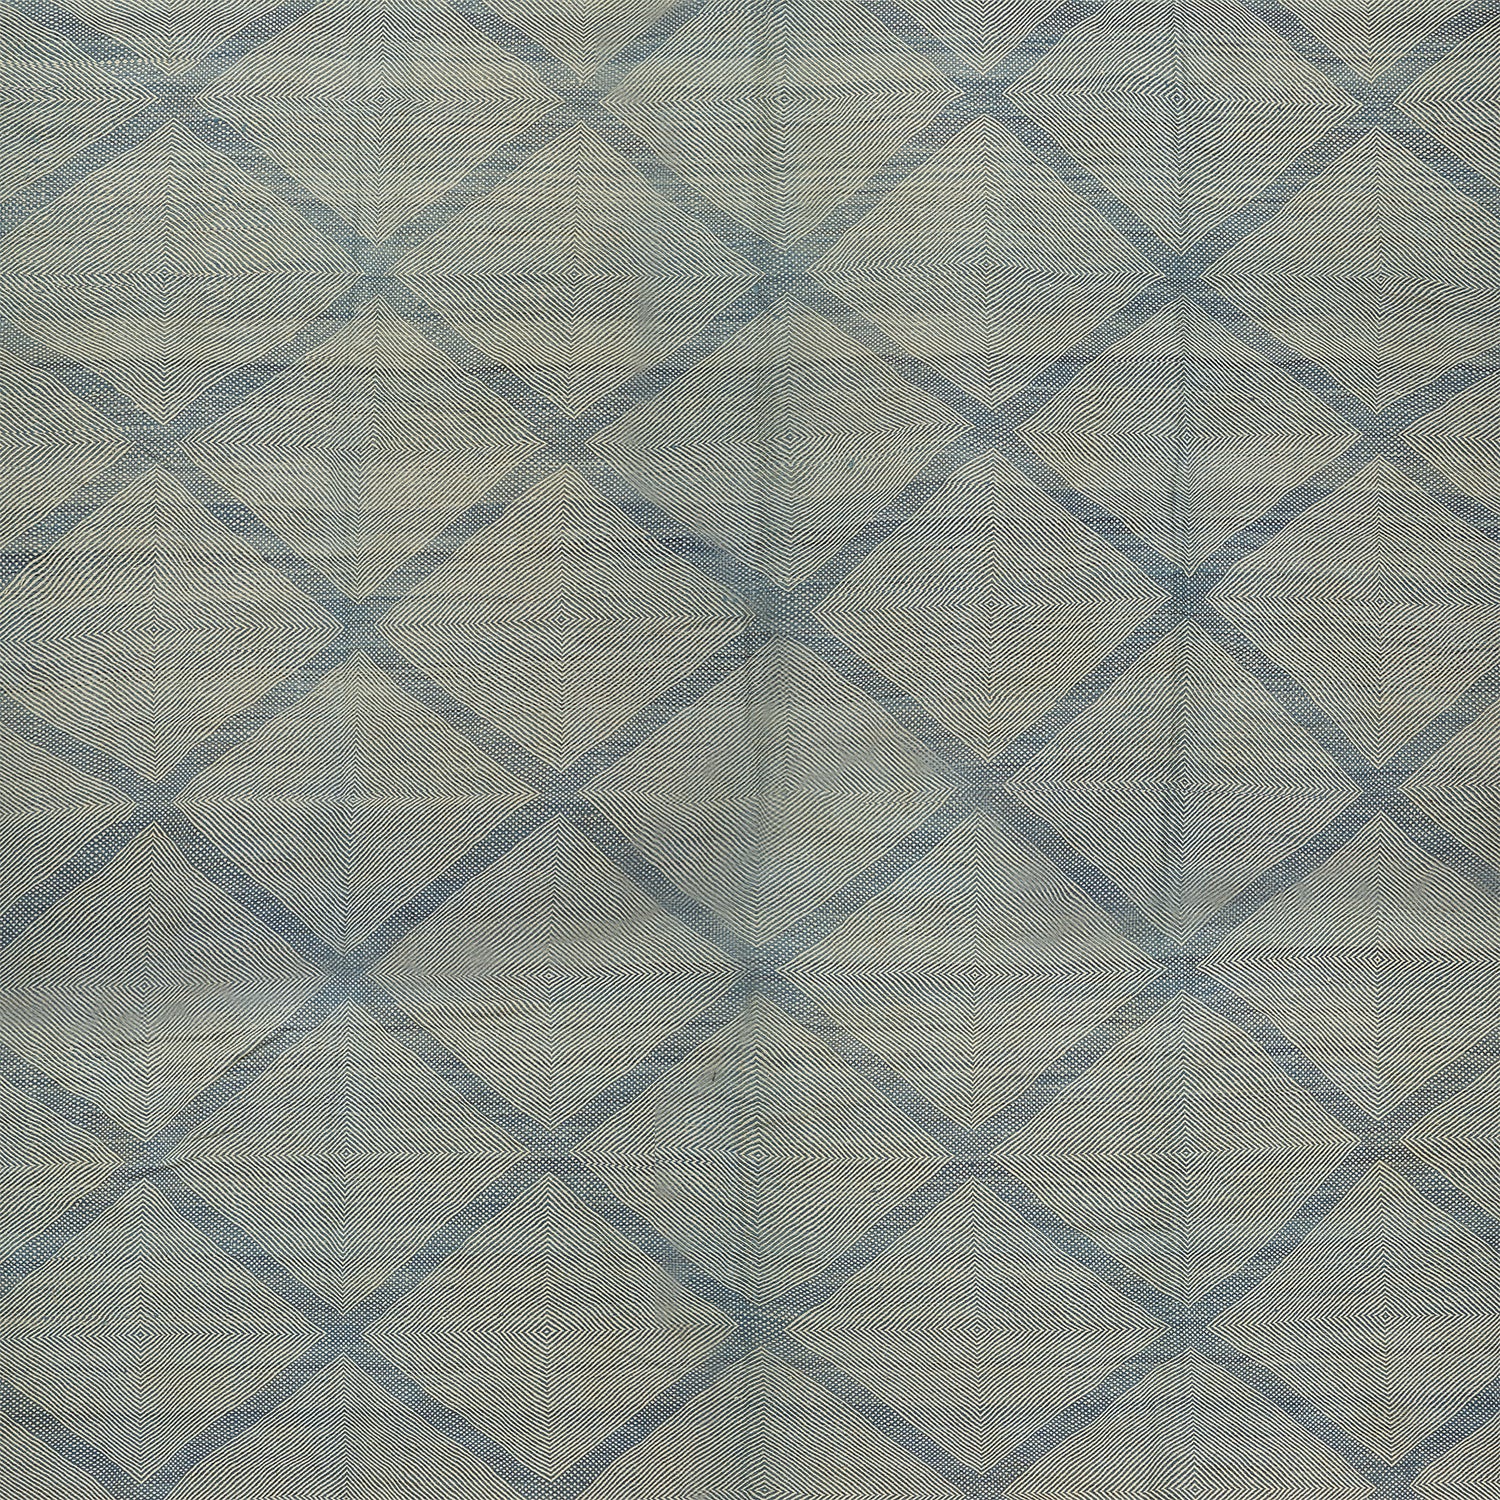 Geometric lattice patterned fabric in muted blue and grey shades.